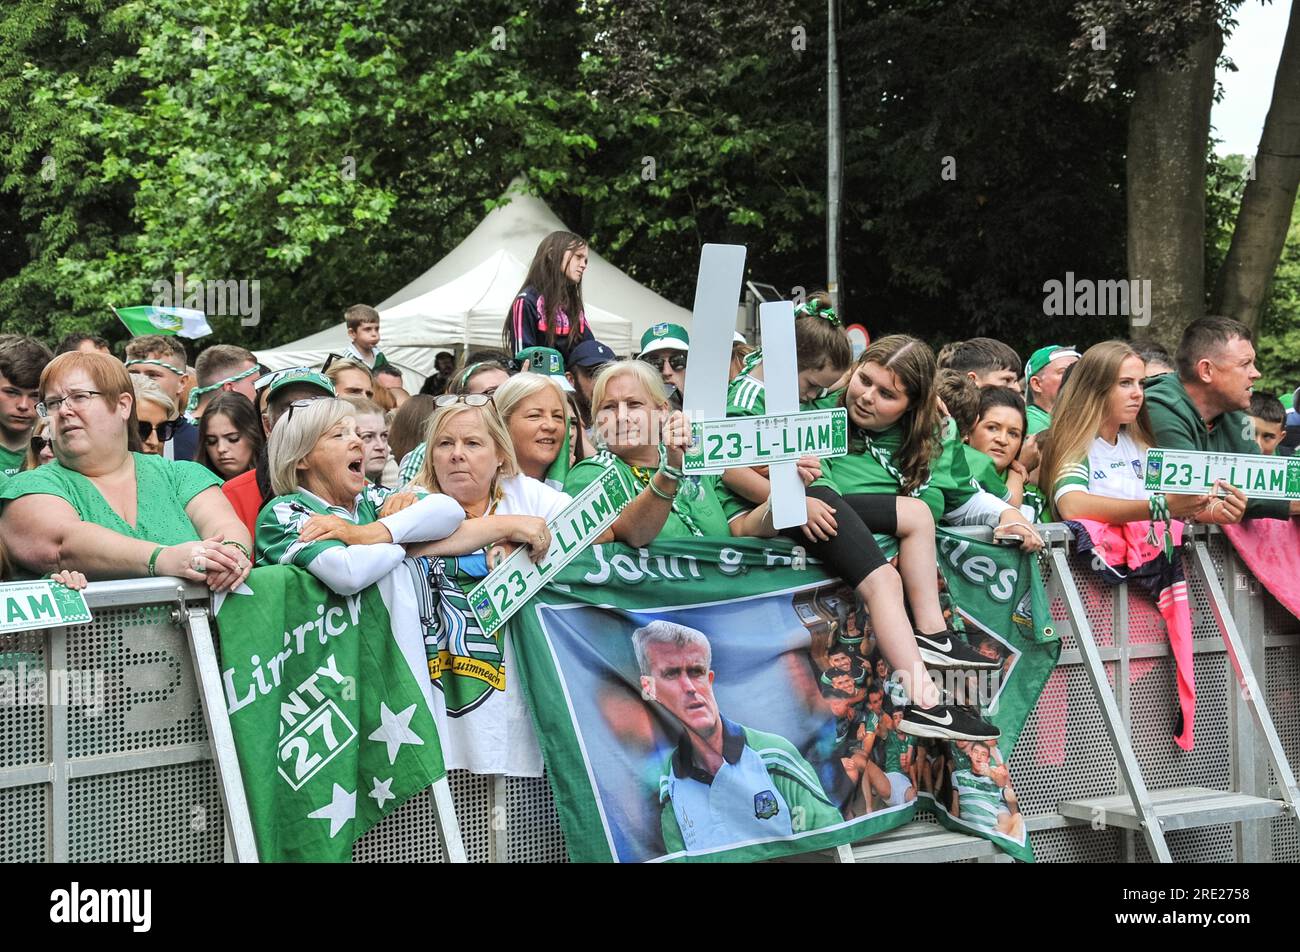 Limerick city, Ireland. 24th July, 2023.Limerick’s All-Ireland Senior Hurling Champions were greeted this evening by thousands of supporters when they took to the stage at Pery Square after they secured victory over Kilkenny in a thrilling encounter at Croke Park. Credit: Karlis Dzjamko/Alamy Live News Stock Photo